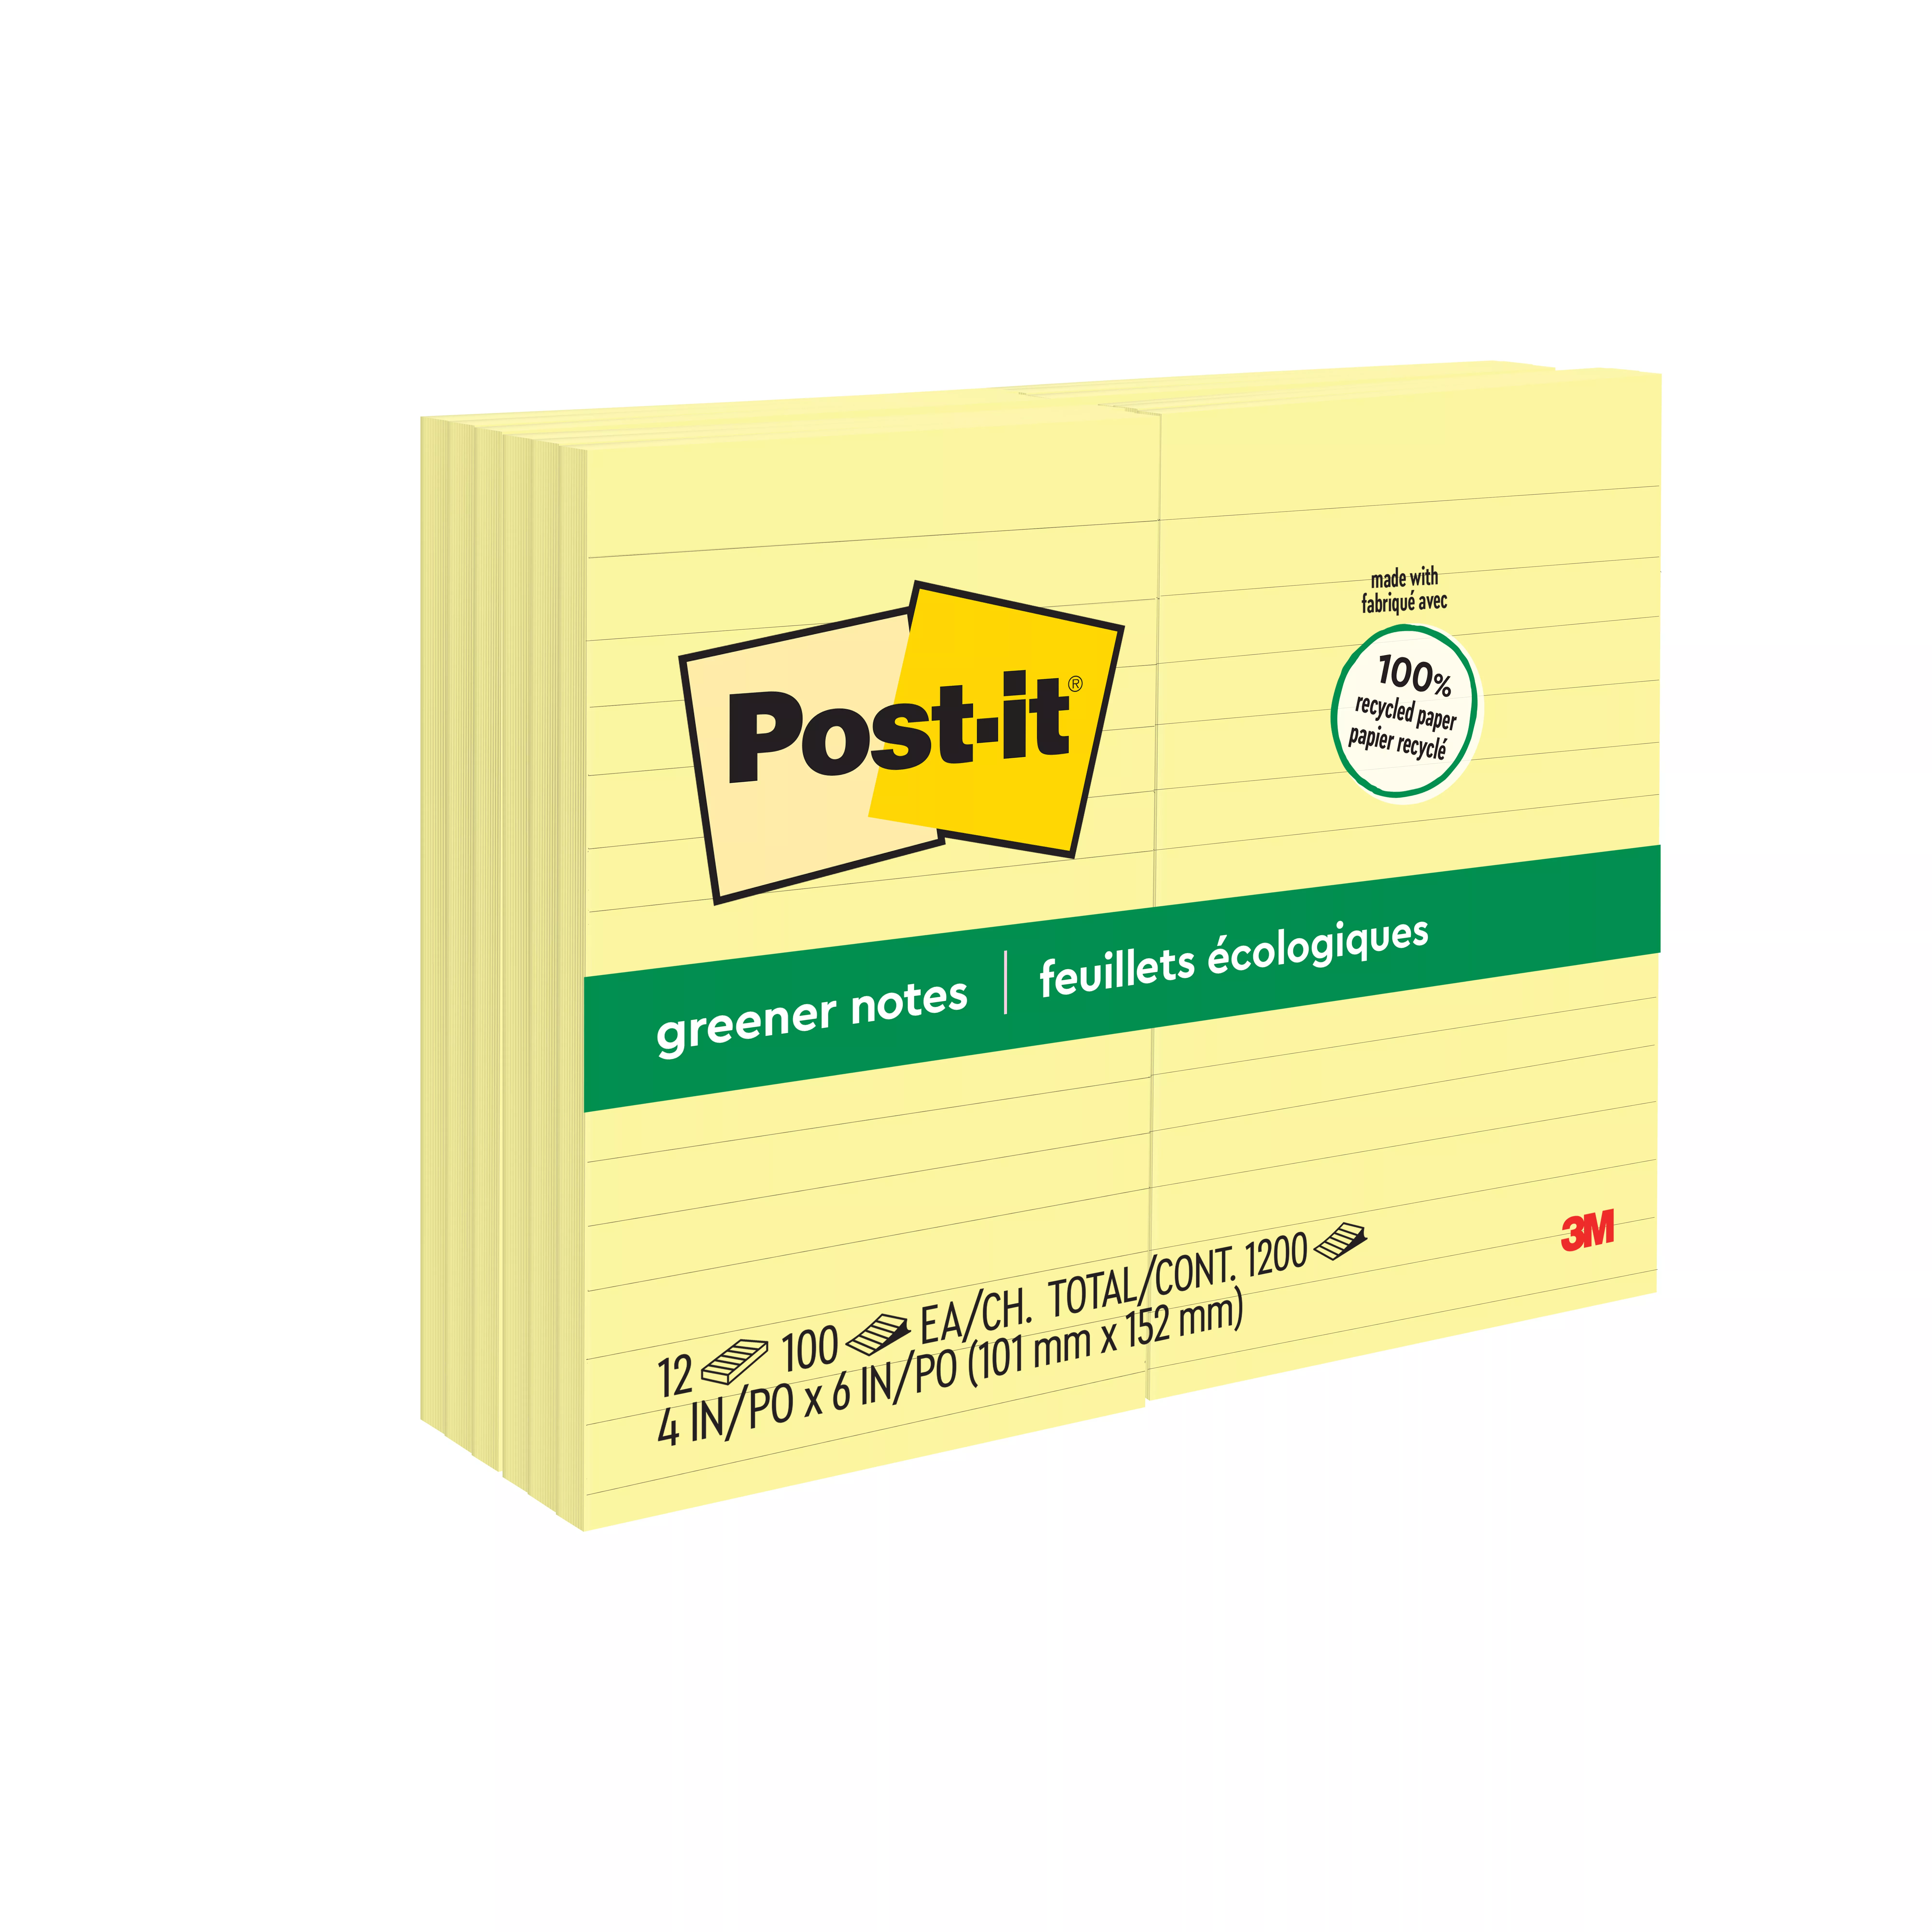 SKU 7100243767 | Post-it® Notes 660-RP